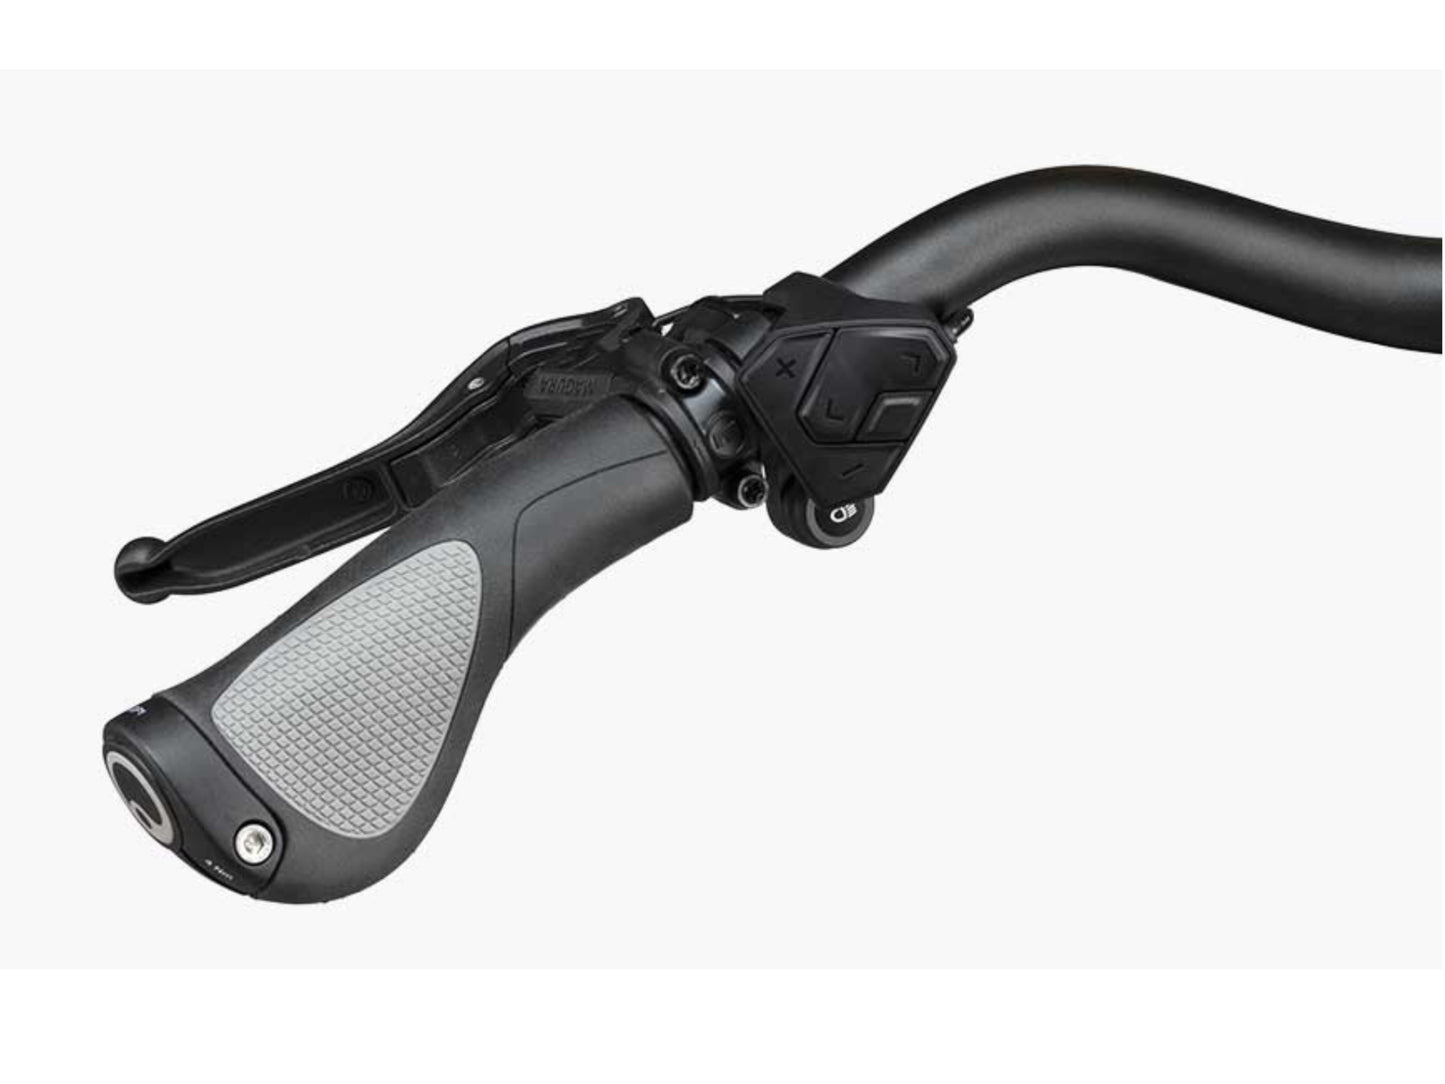 Riese and Muller Nevo GT Vario emtb hardtail close up comfort kit option